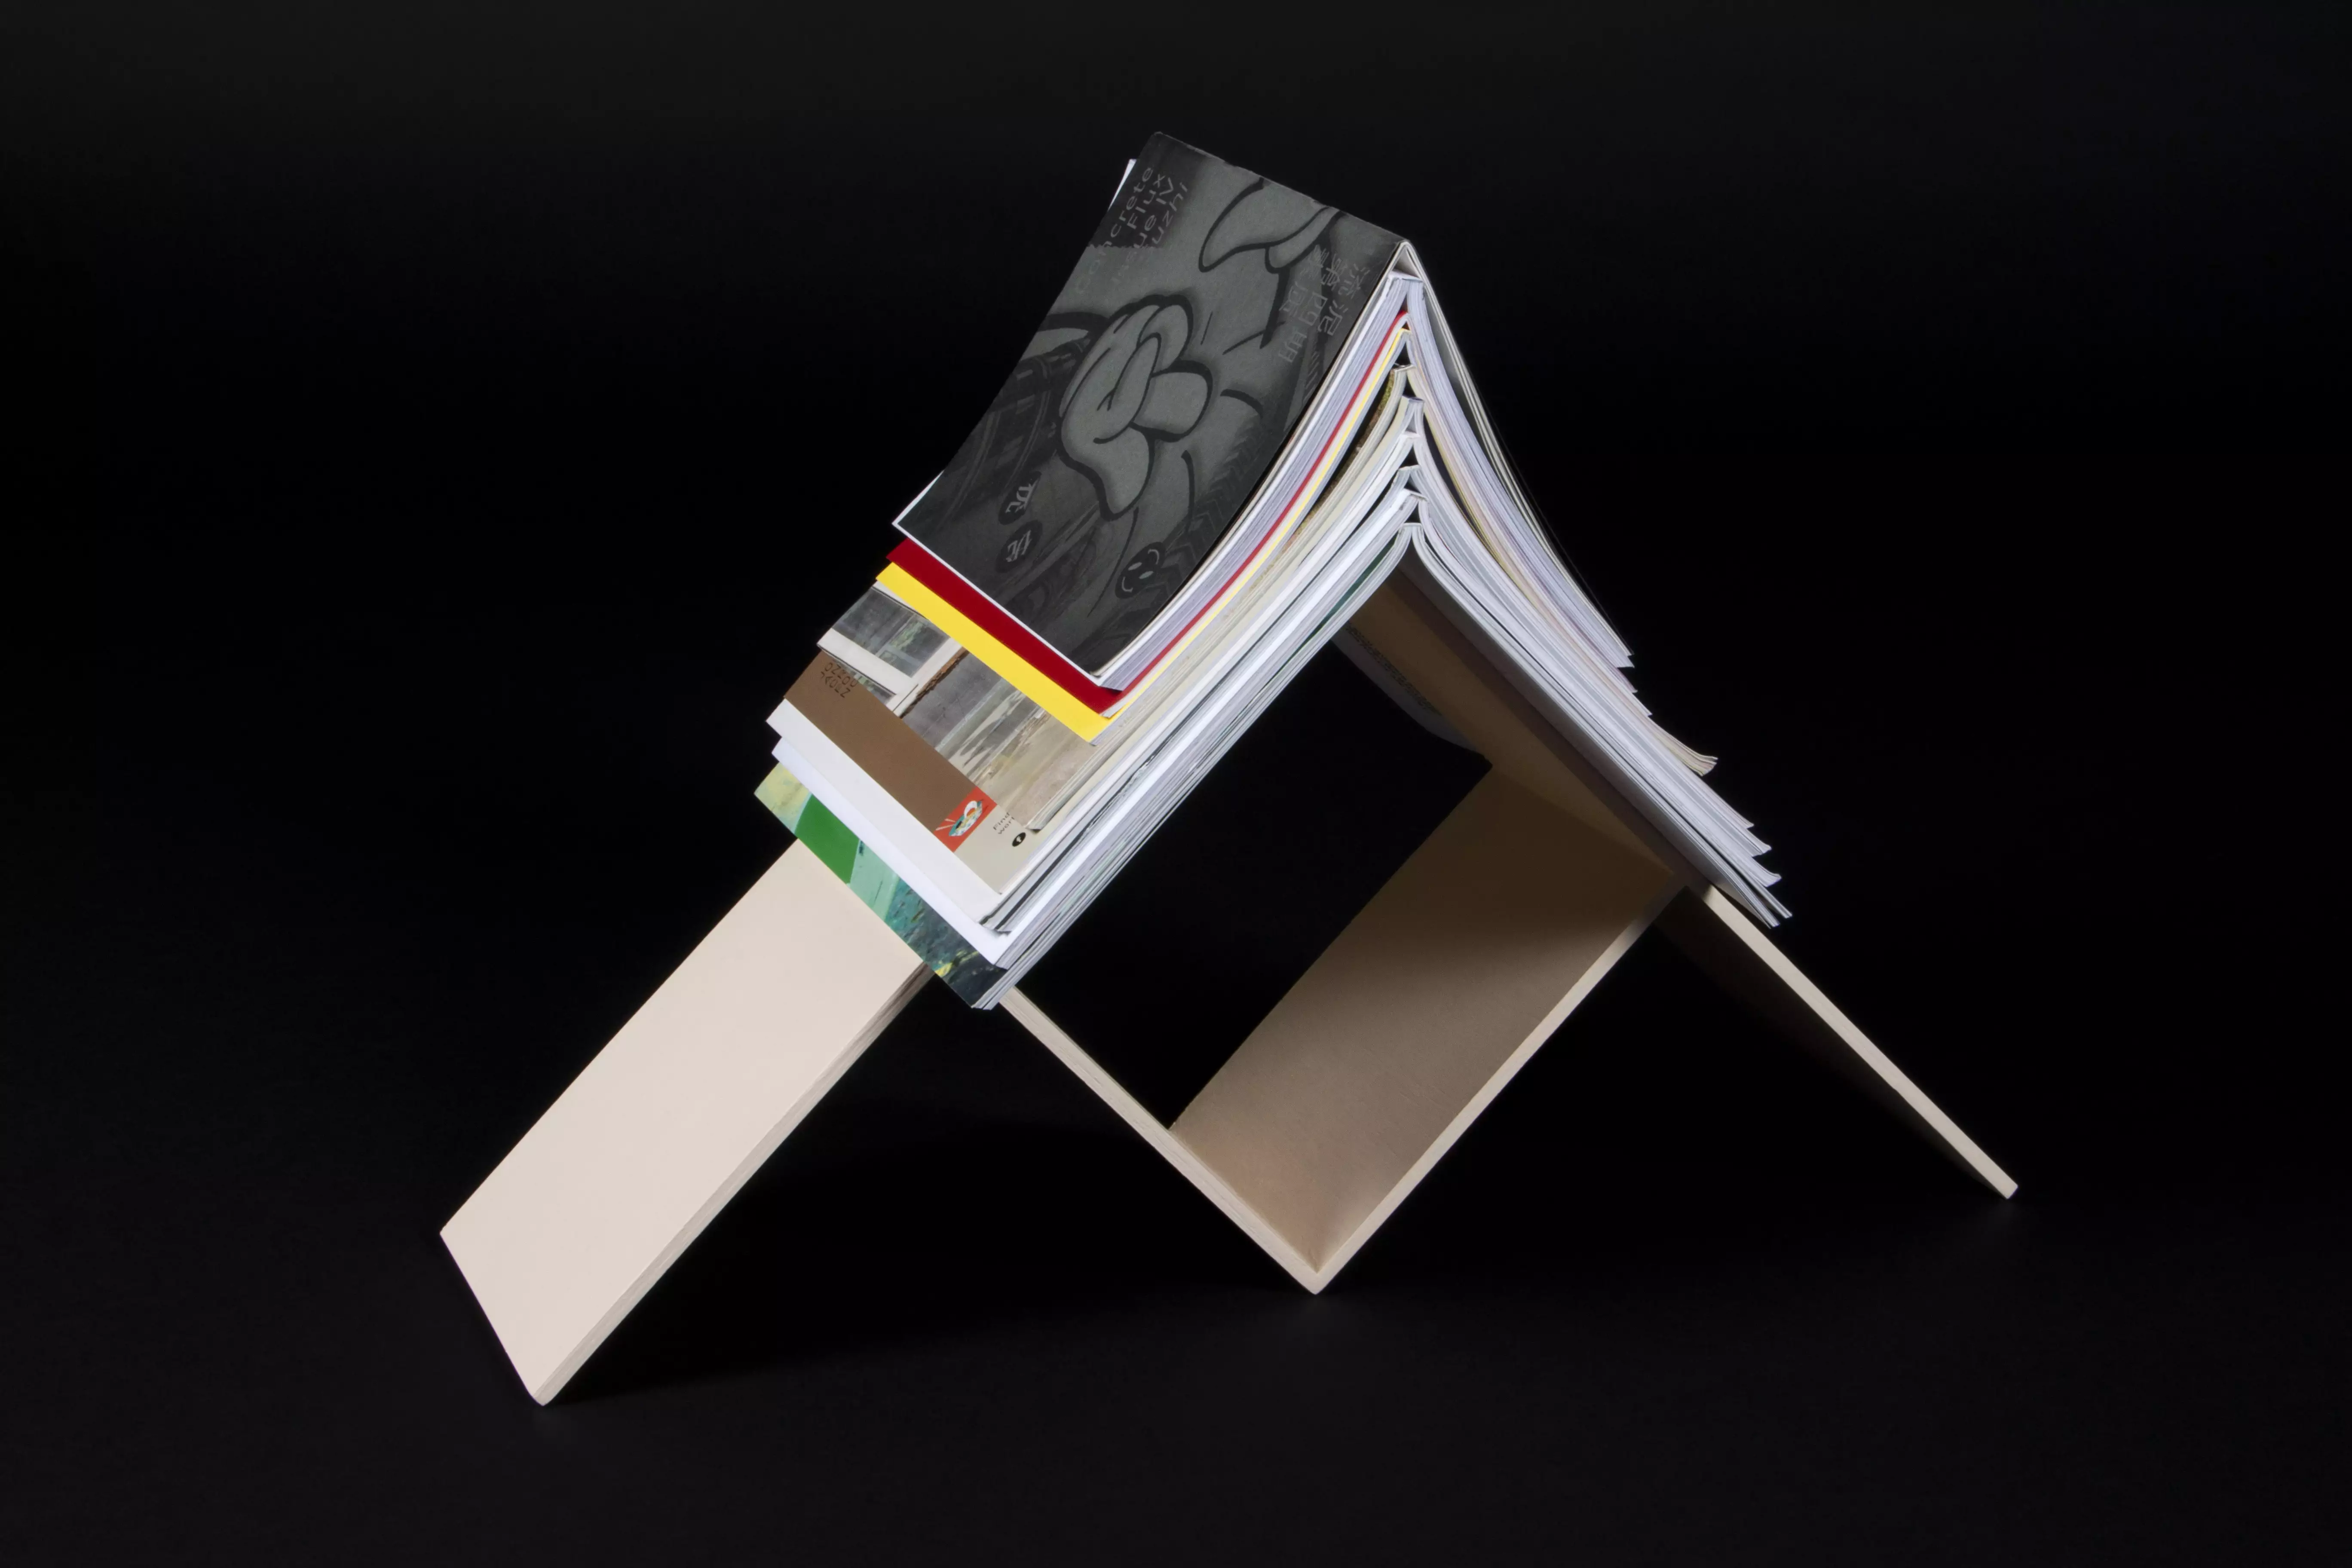 An experiemental bookshelf where the books are stacked on top of each other with their spines open.